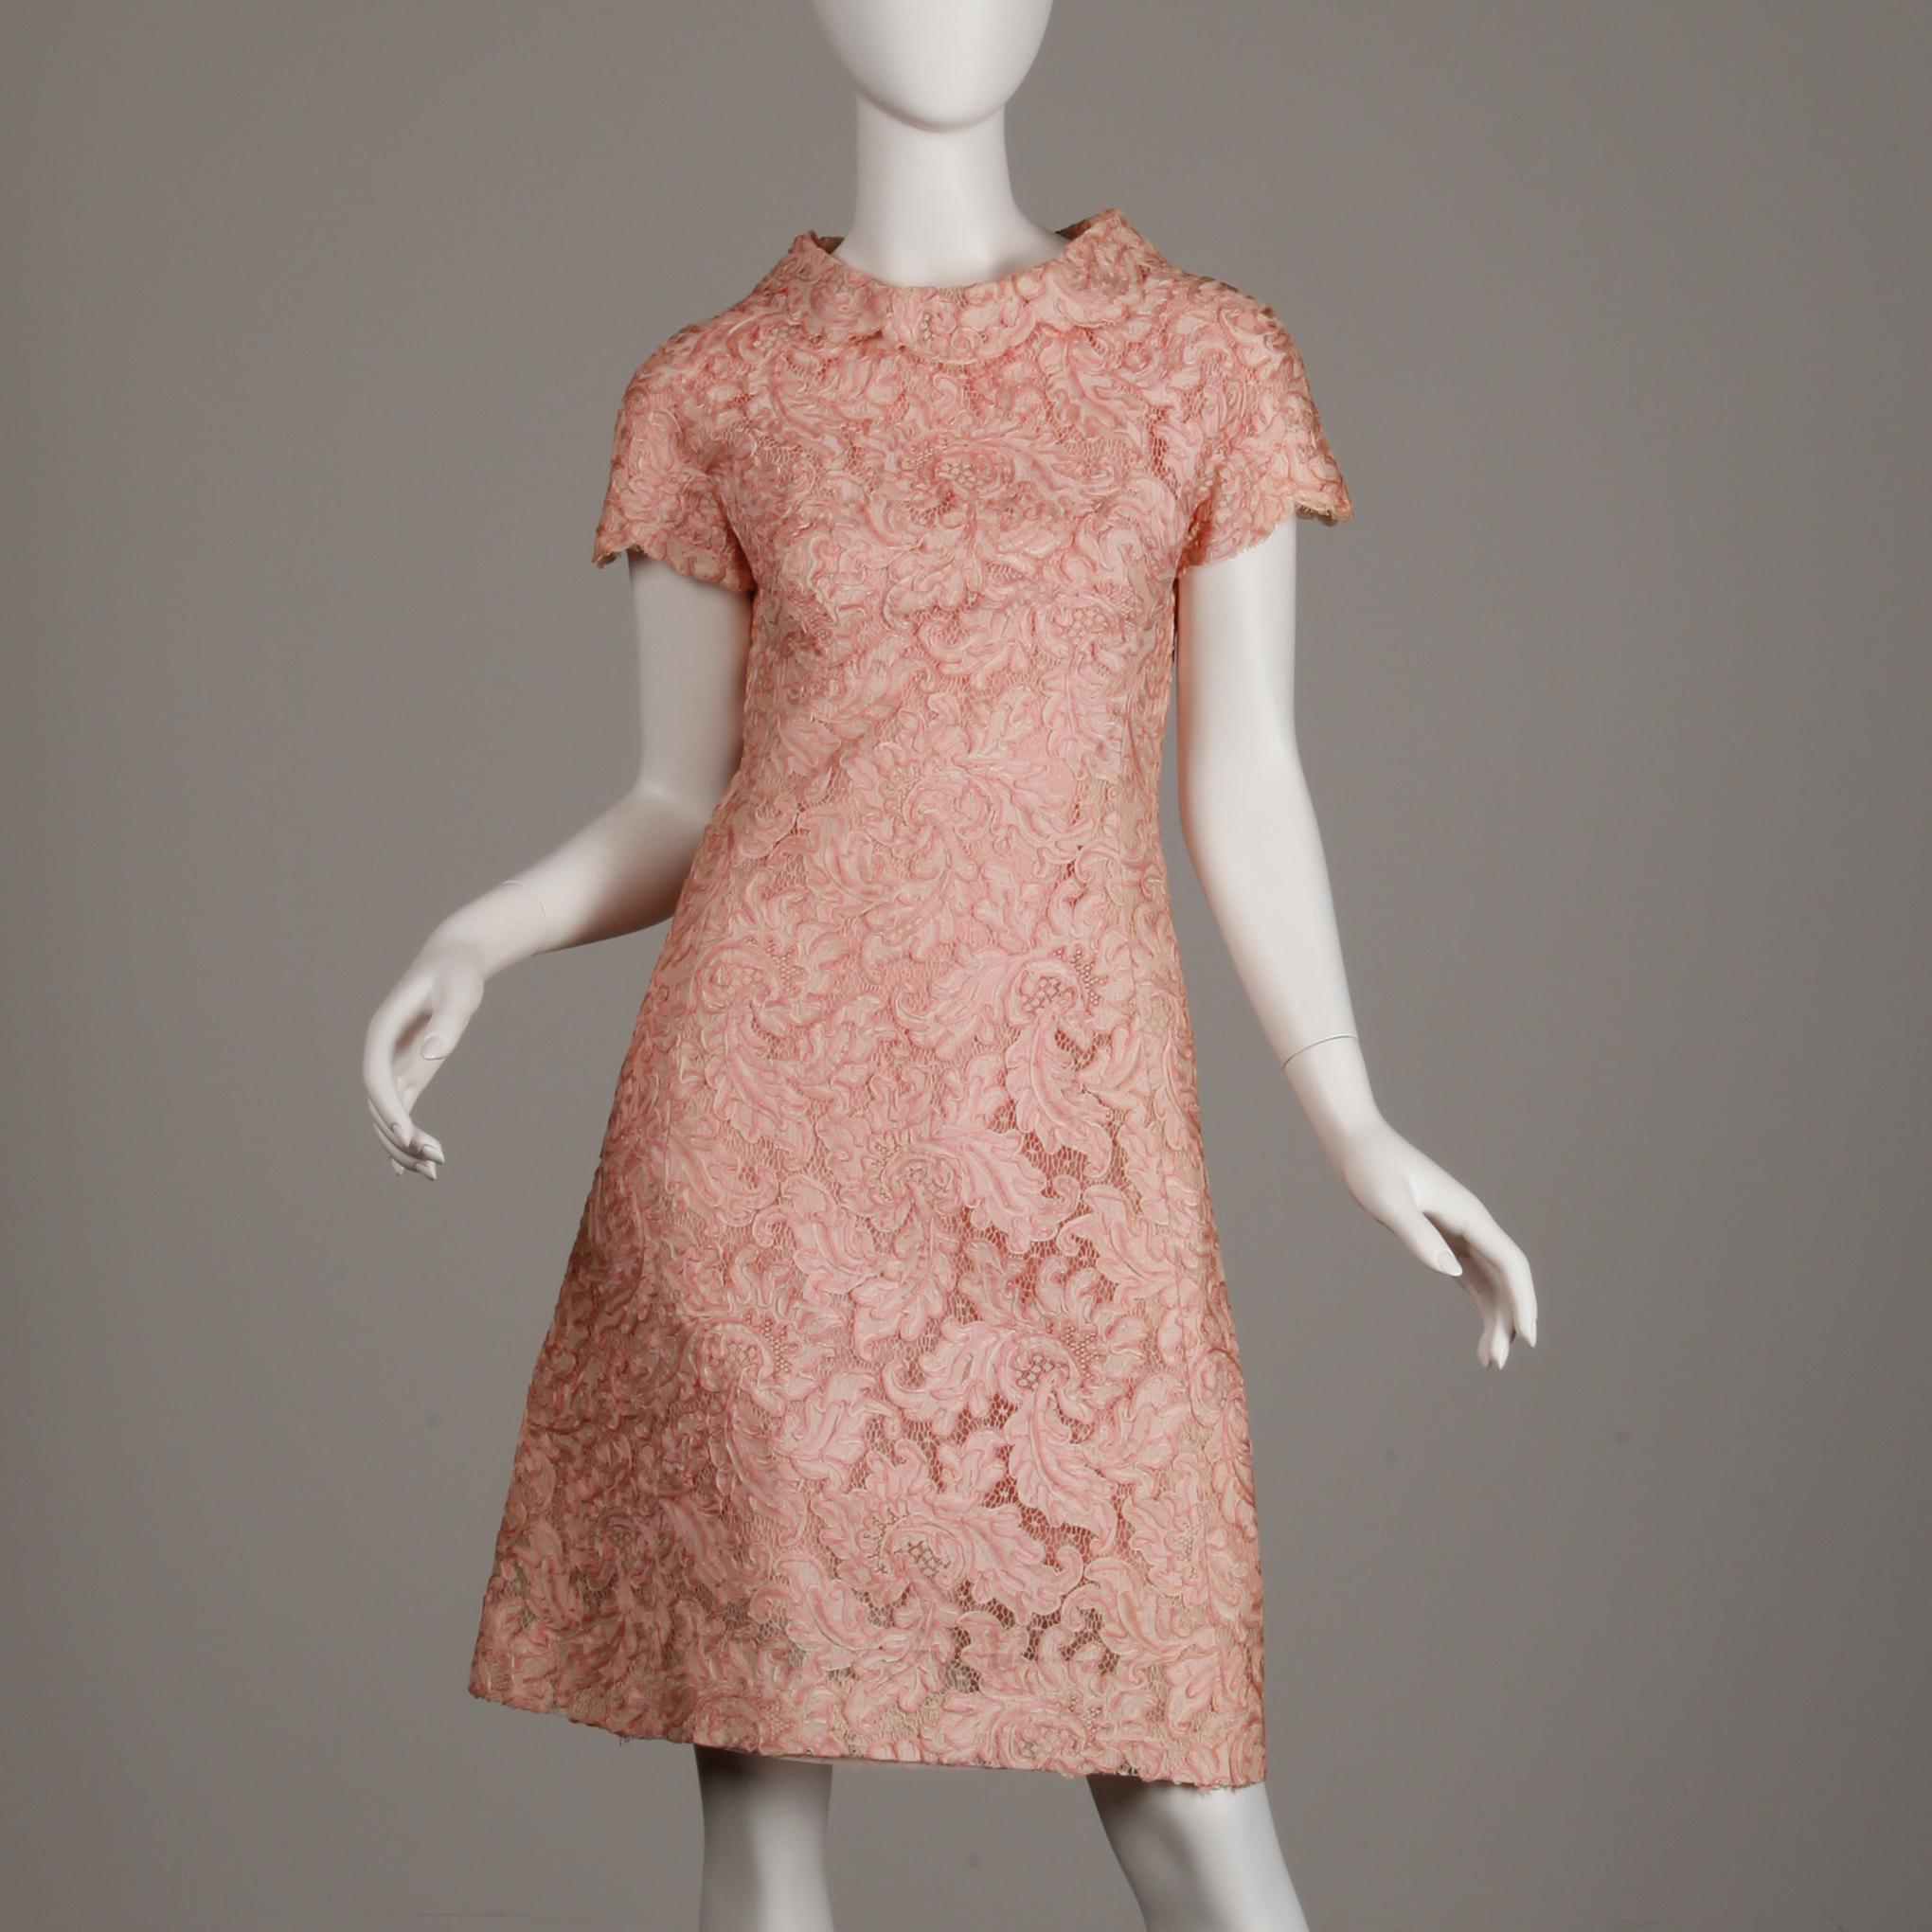 1960s Mollie Parnis Vintage Pink Soutache + Scalloped Lace Shift Dress Dress In Excellent Condition For Sale In Sparks, NV